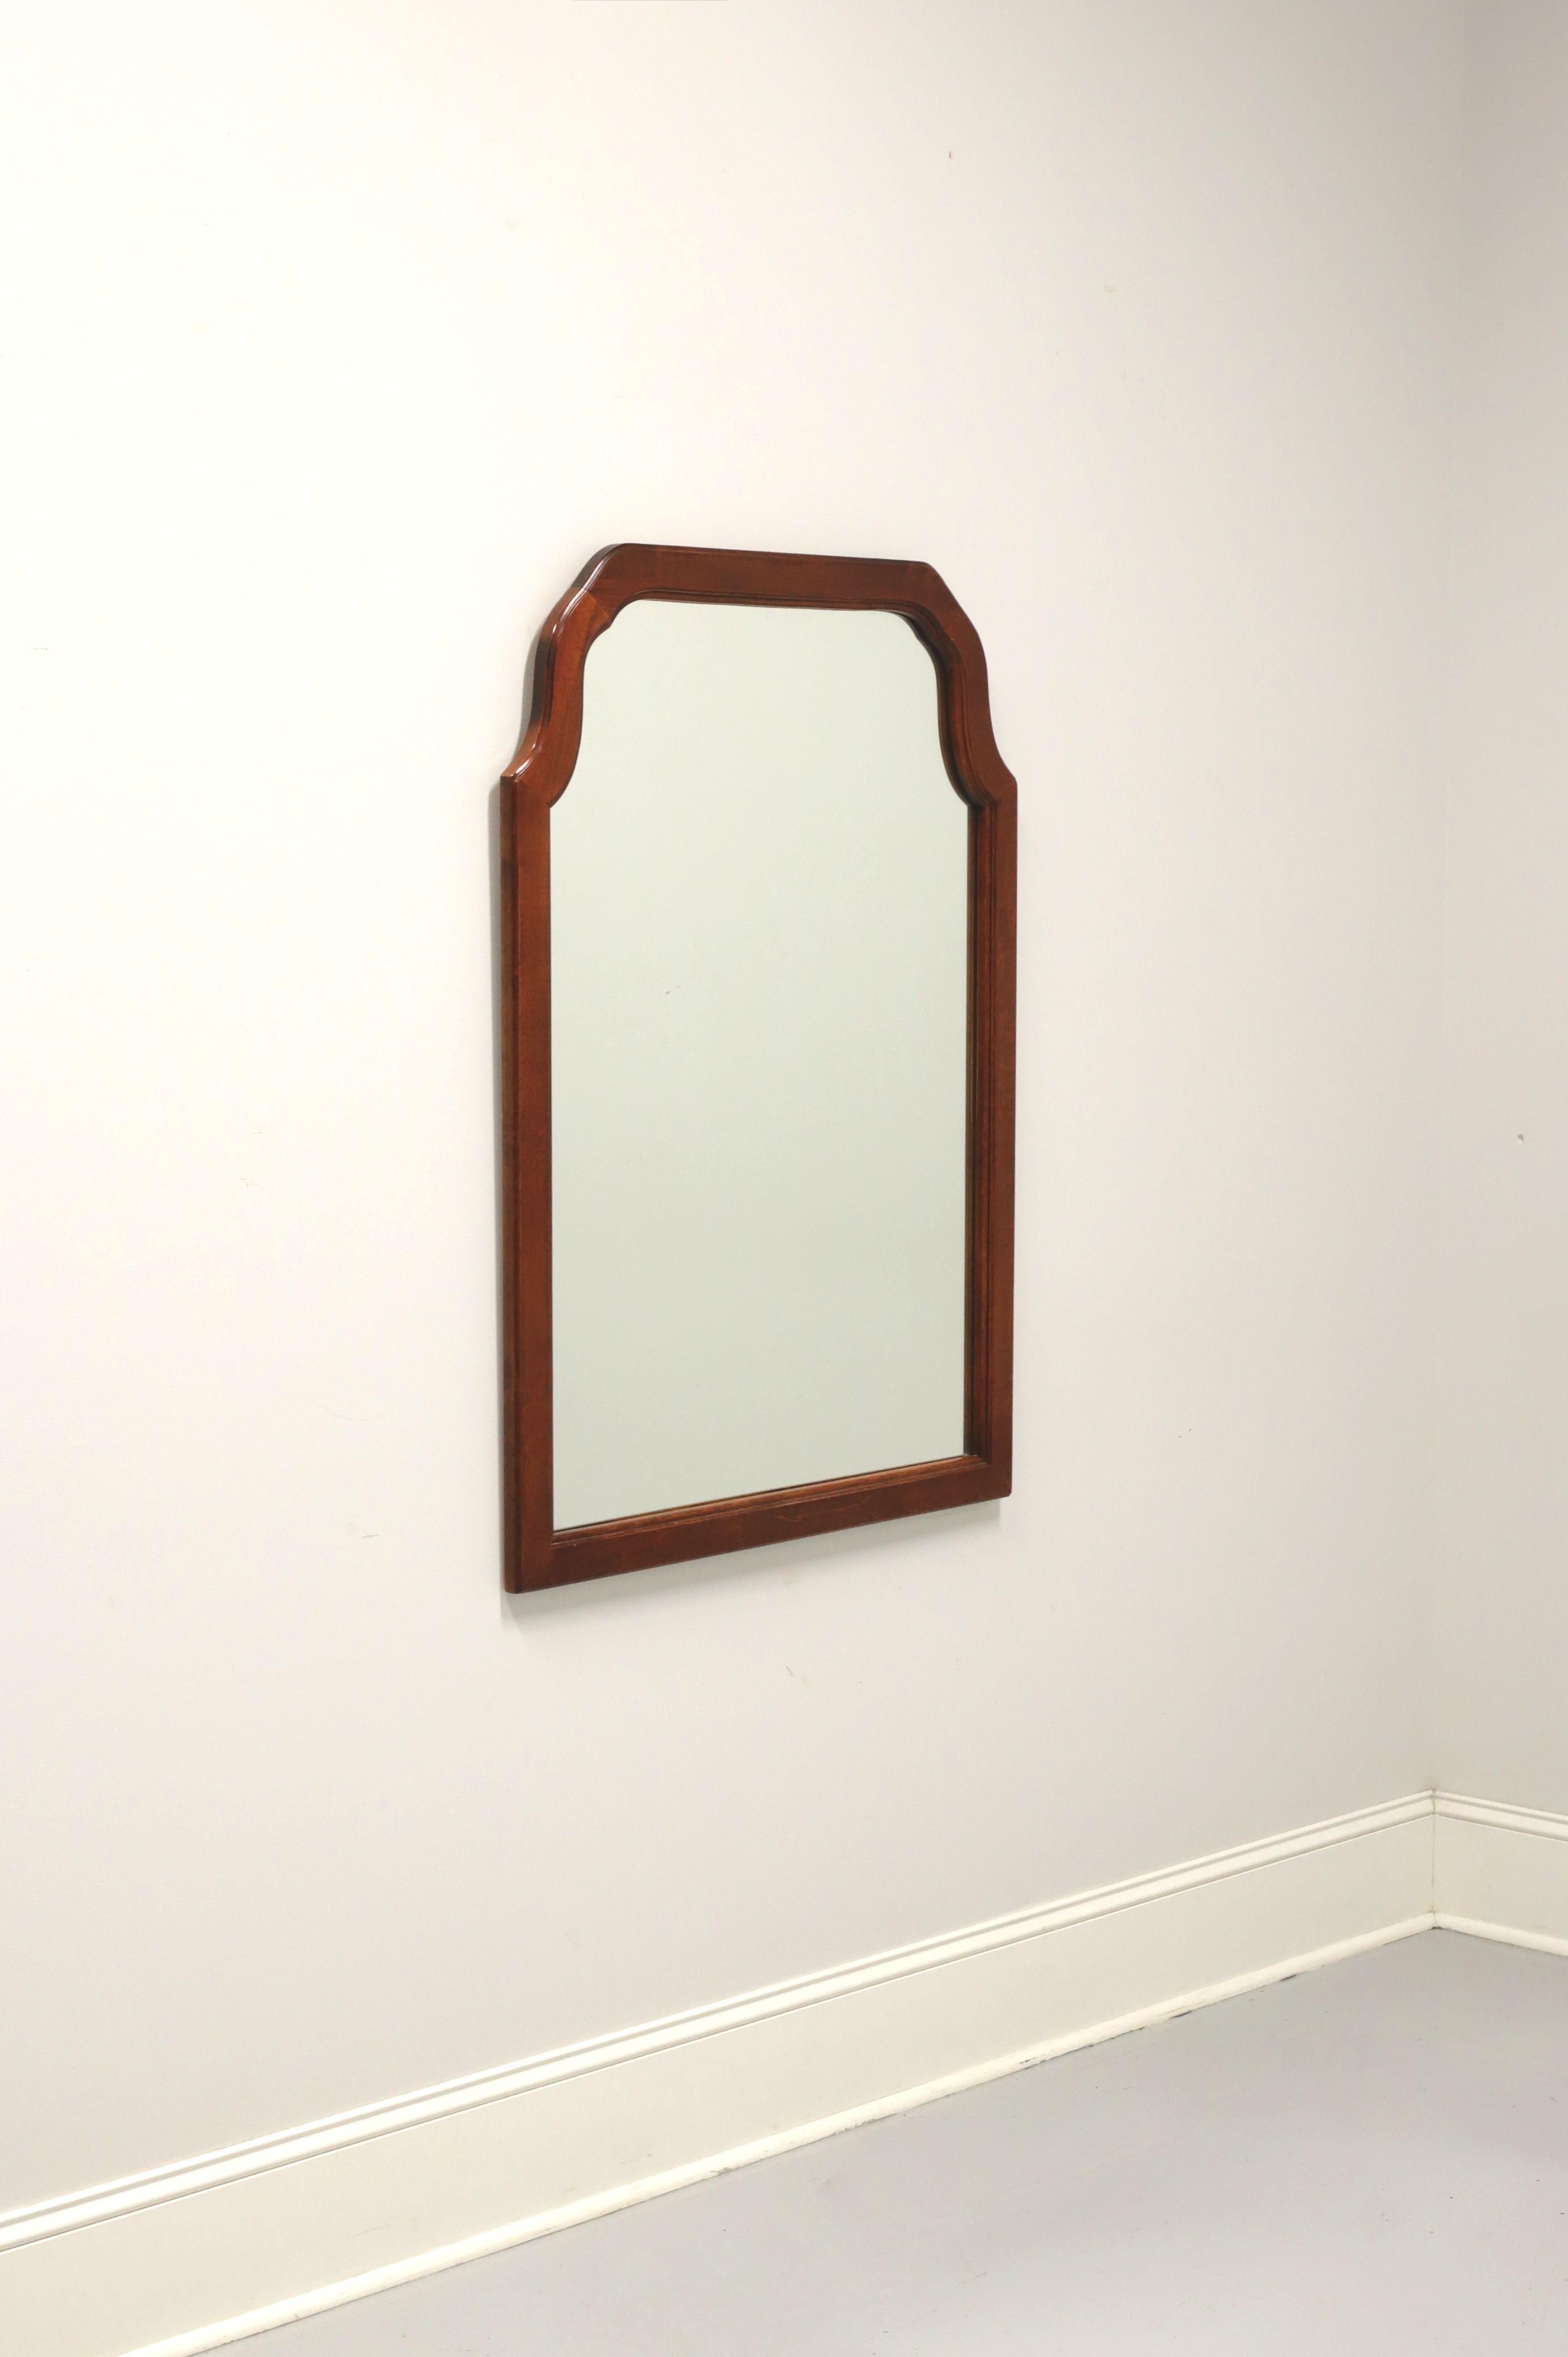 A Traditional style wall mirror, unbranded, similar quality to Craftique or Henredon. Mirrored glass in a cherry wood frame with flat arched top. Made in the USA, in the mid 20th century.

Measures: 31.5 W 1 D 43.5 H, Weighs approximately: 35